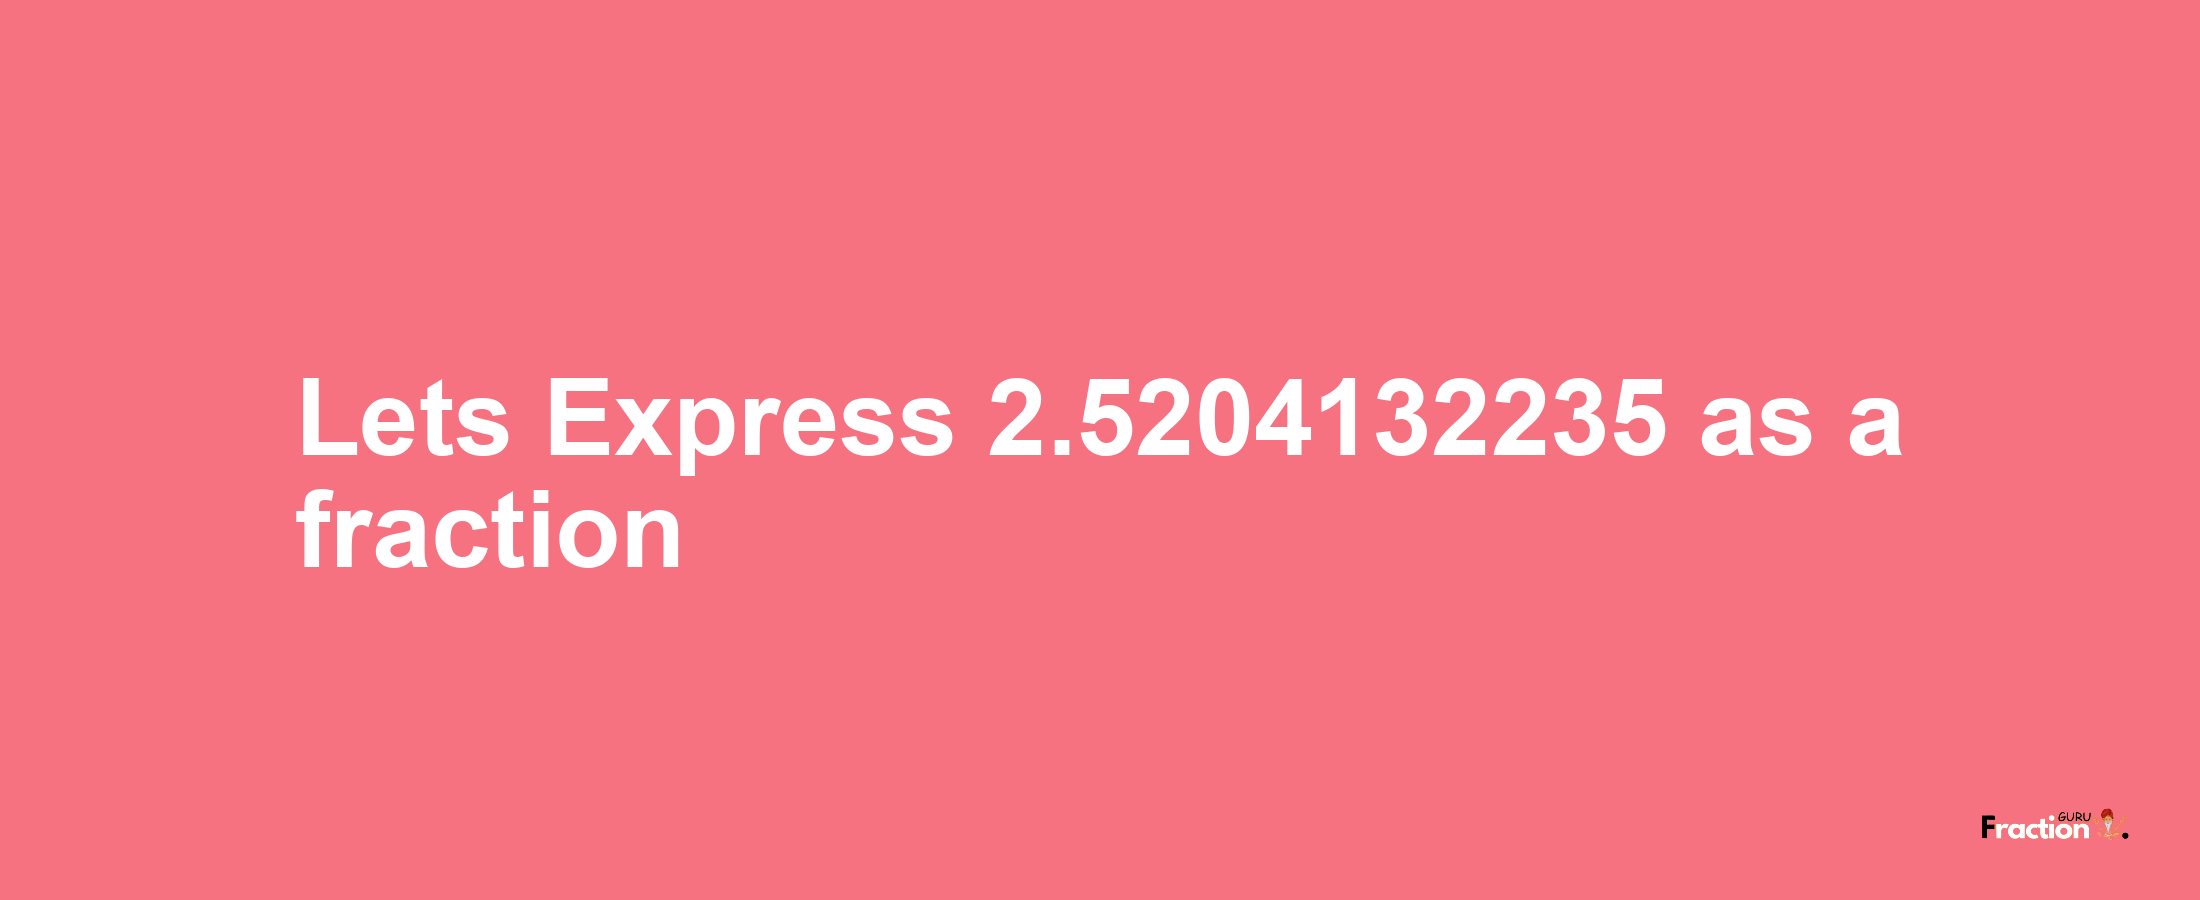 Lets Express 2.5204132235 as afraction